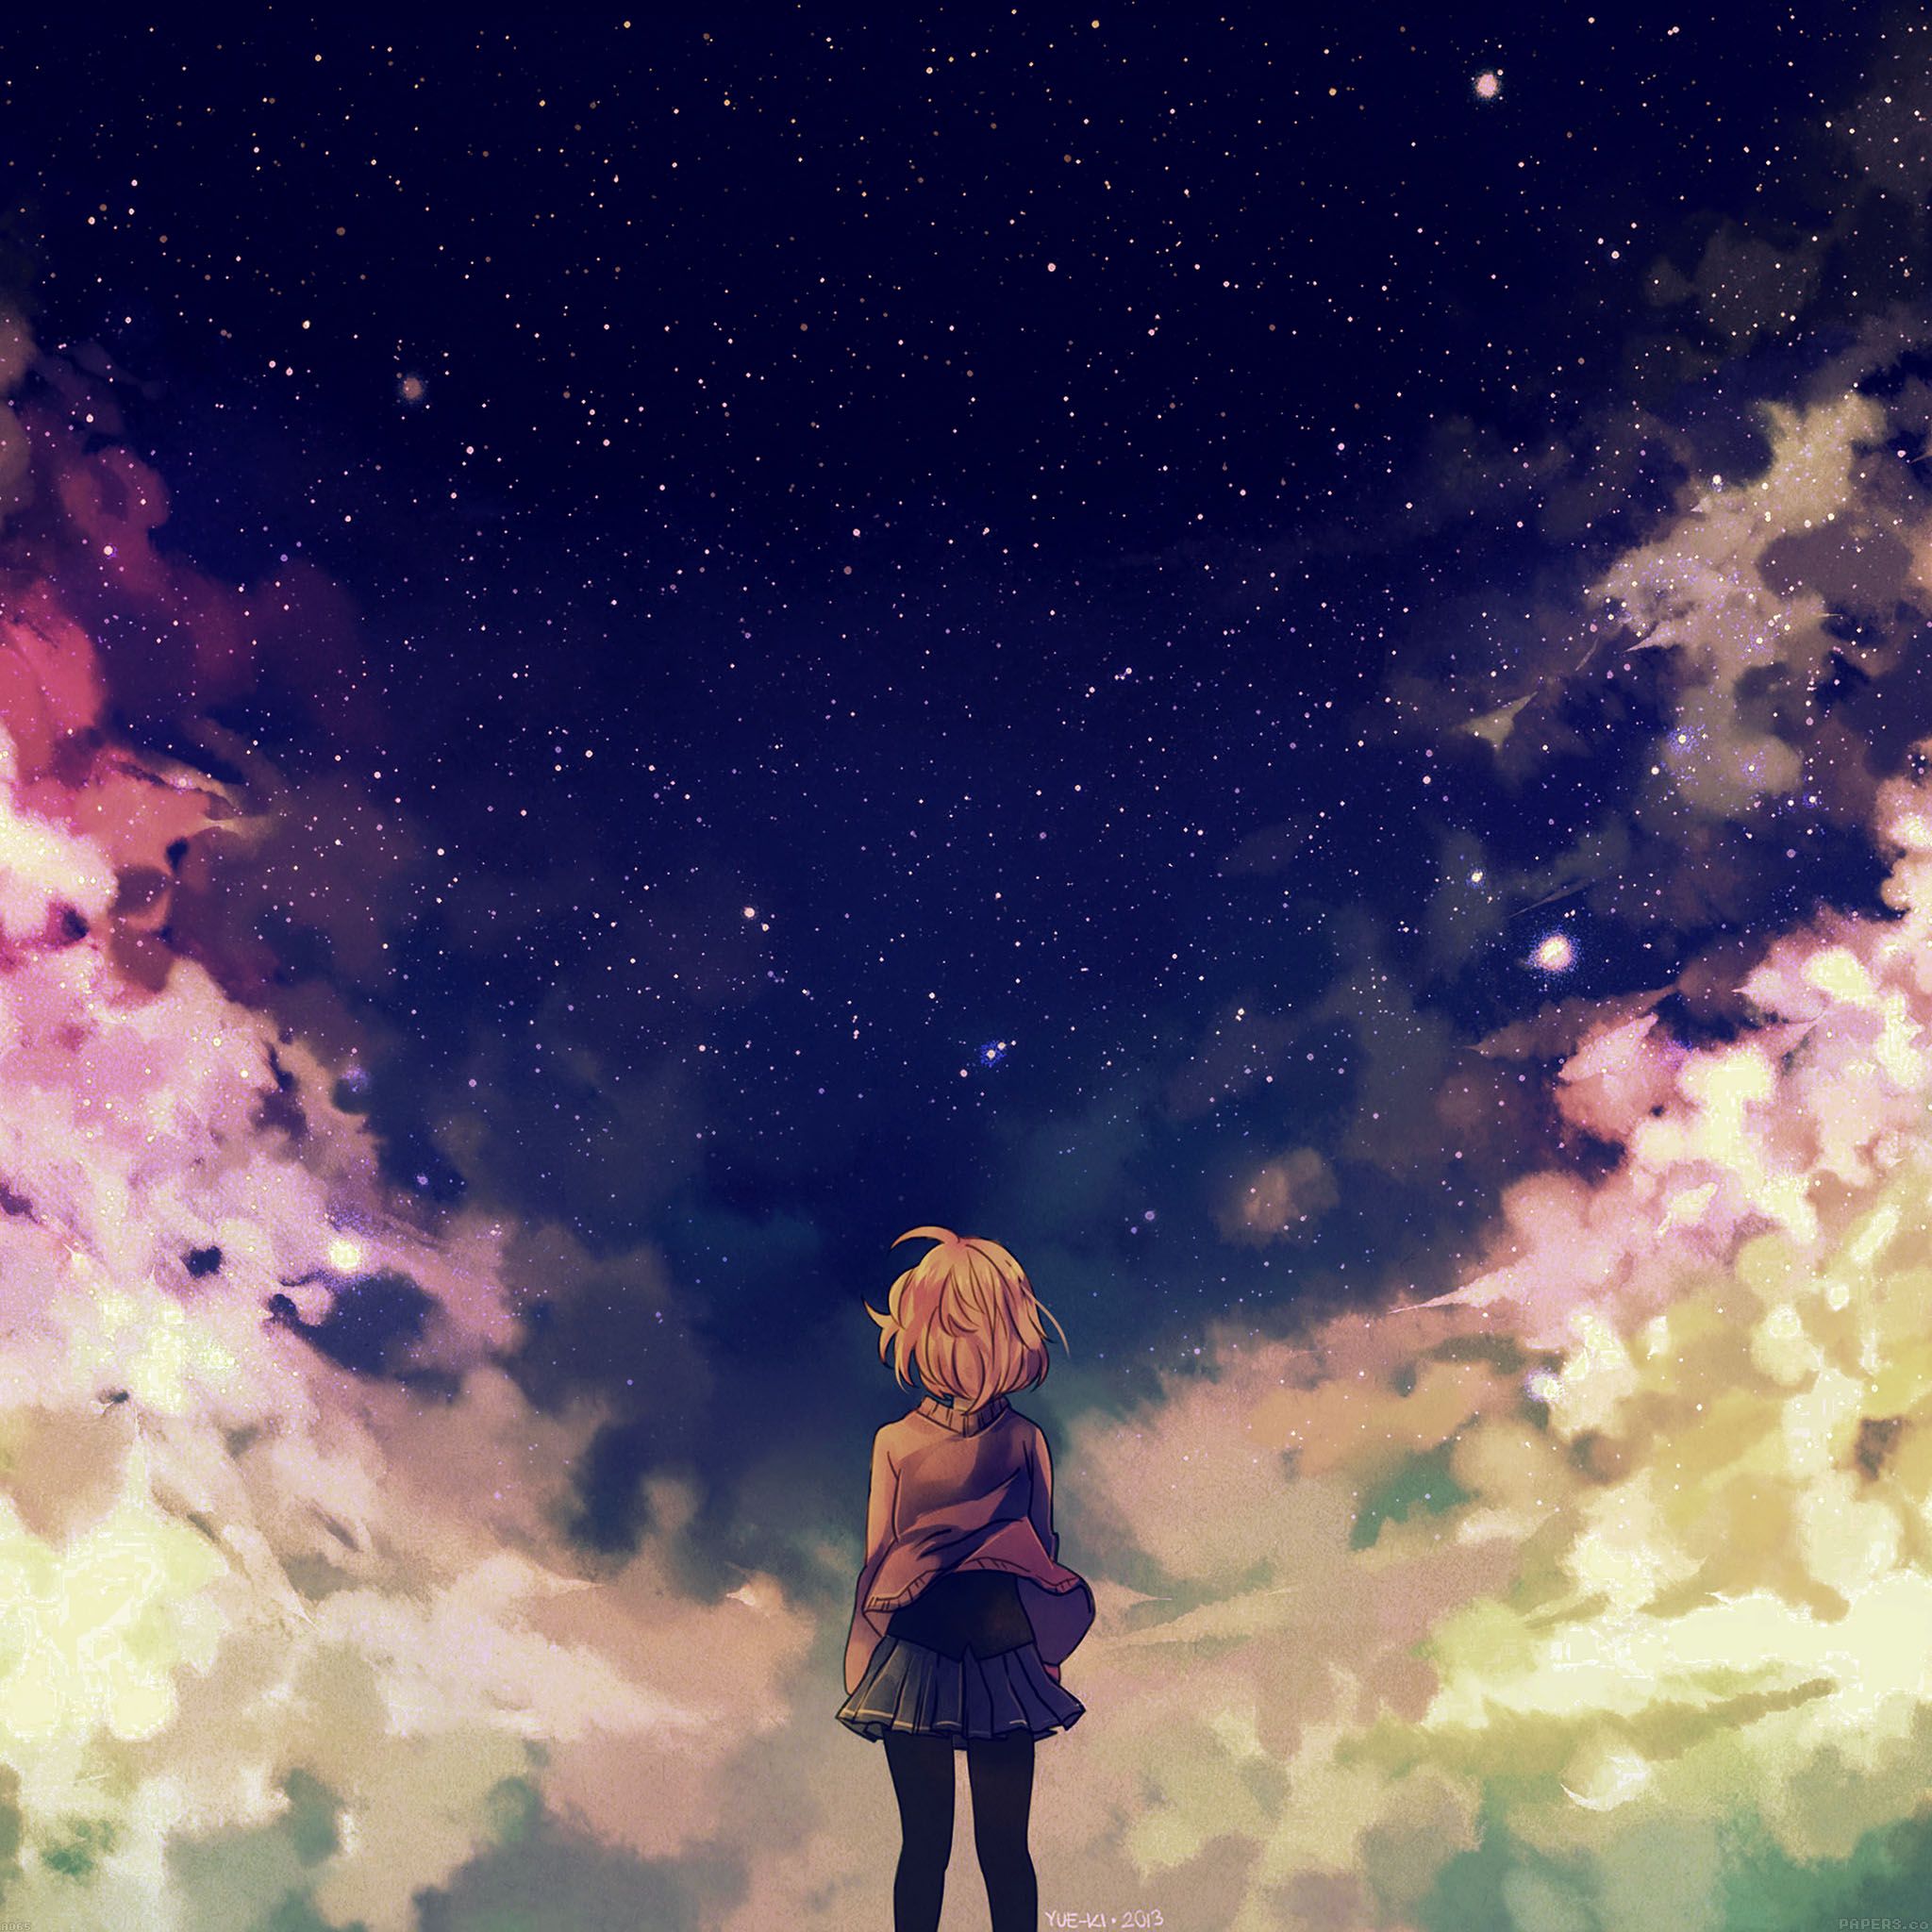 Starry space illust anime girl iPad Air Wallpaper Free Download